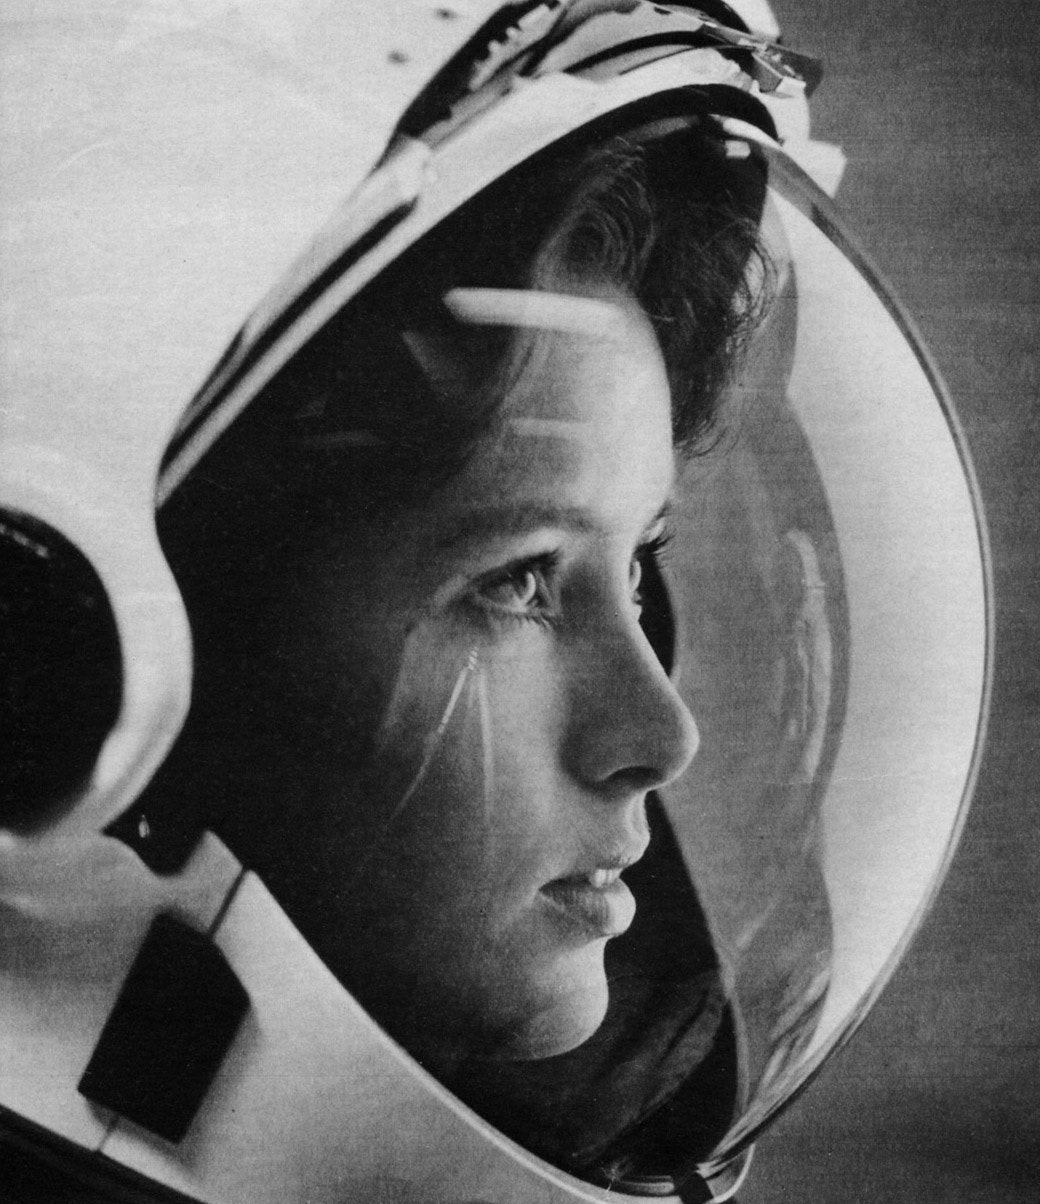 The first mother in space. Anna Fisher, Astronaut, with stars in her eyes on the cover of Life magazine in 1985.